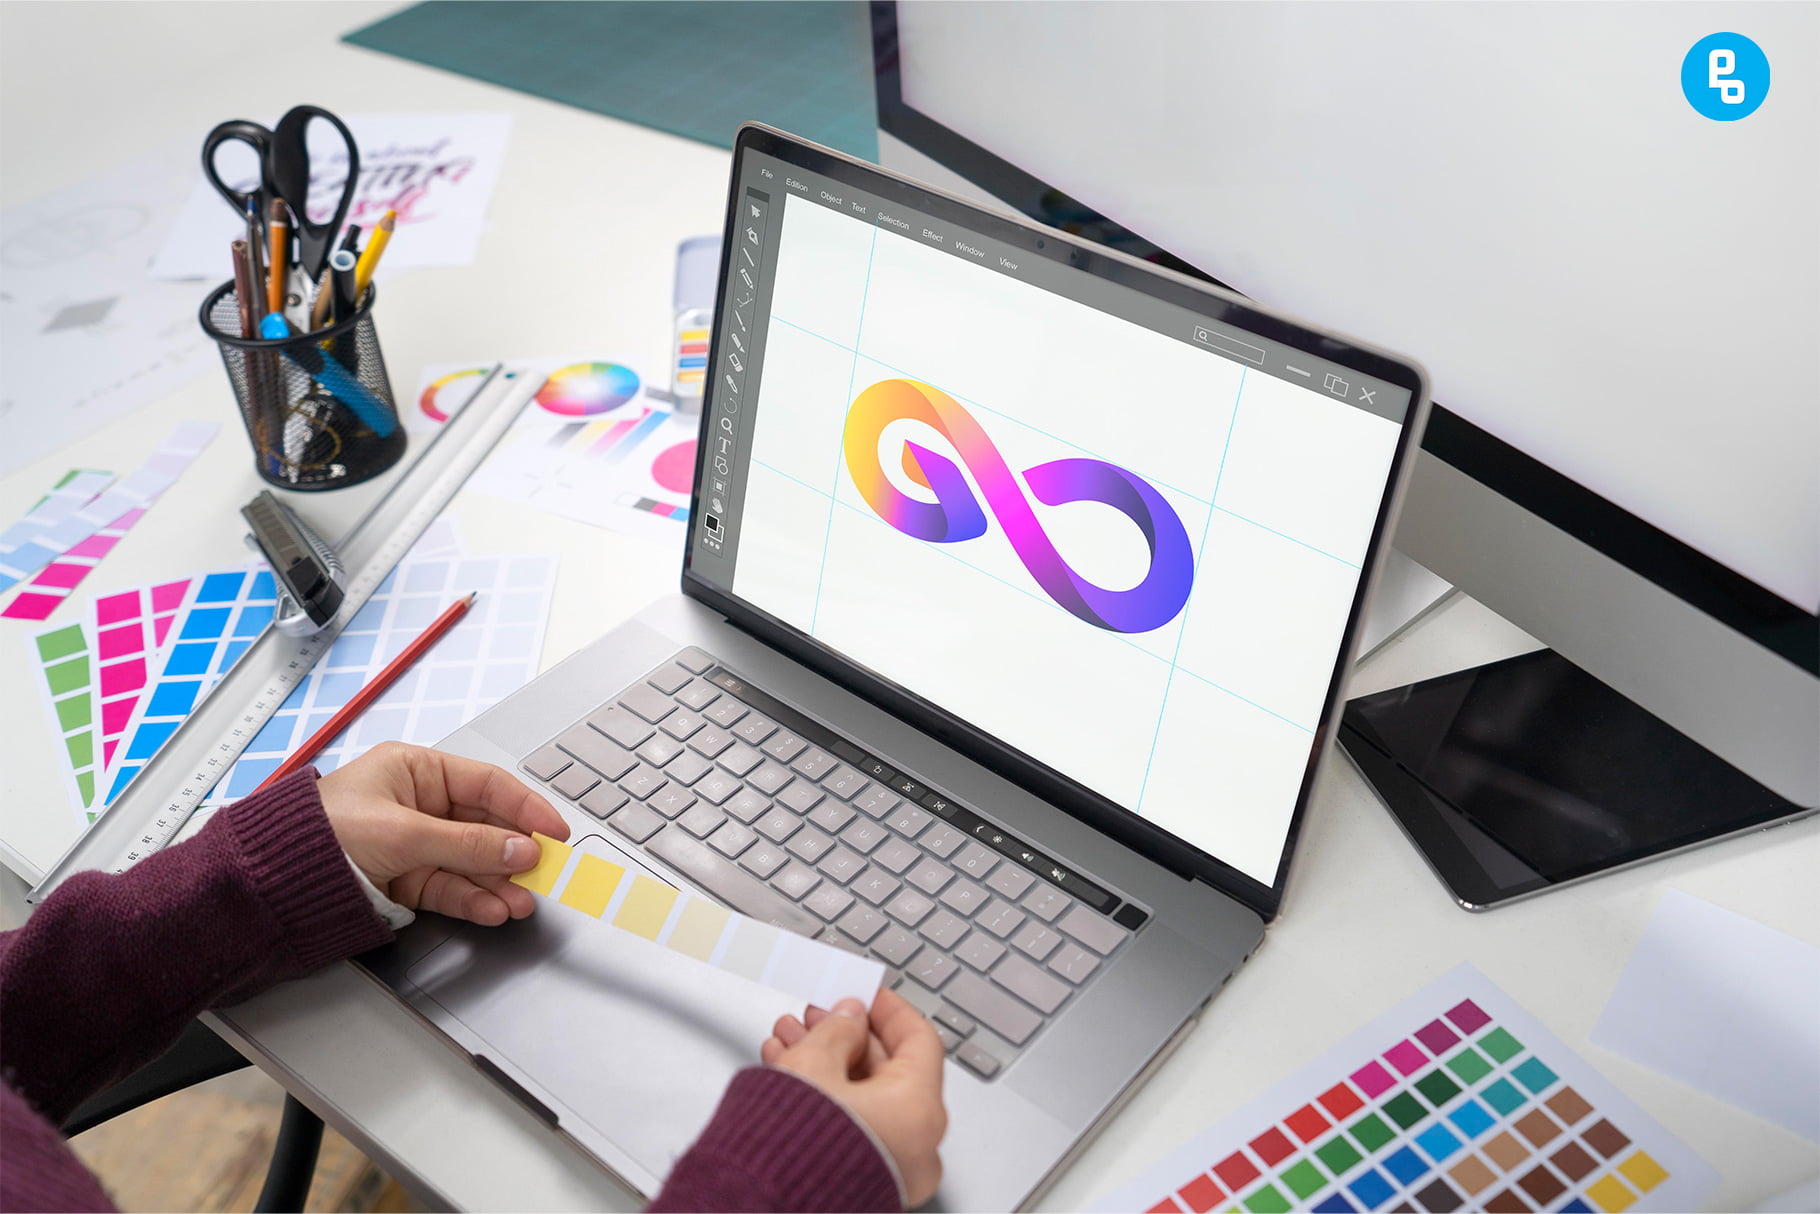 A good logo is simple and memorable, but it does not have to be dull. It should also be adaptable enough to work in a variety of mediums and formats without losing its impact.